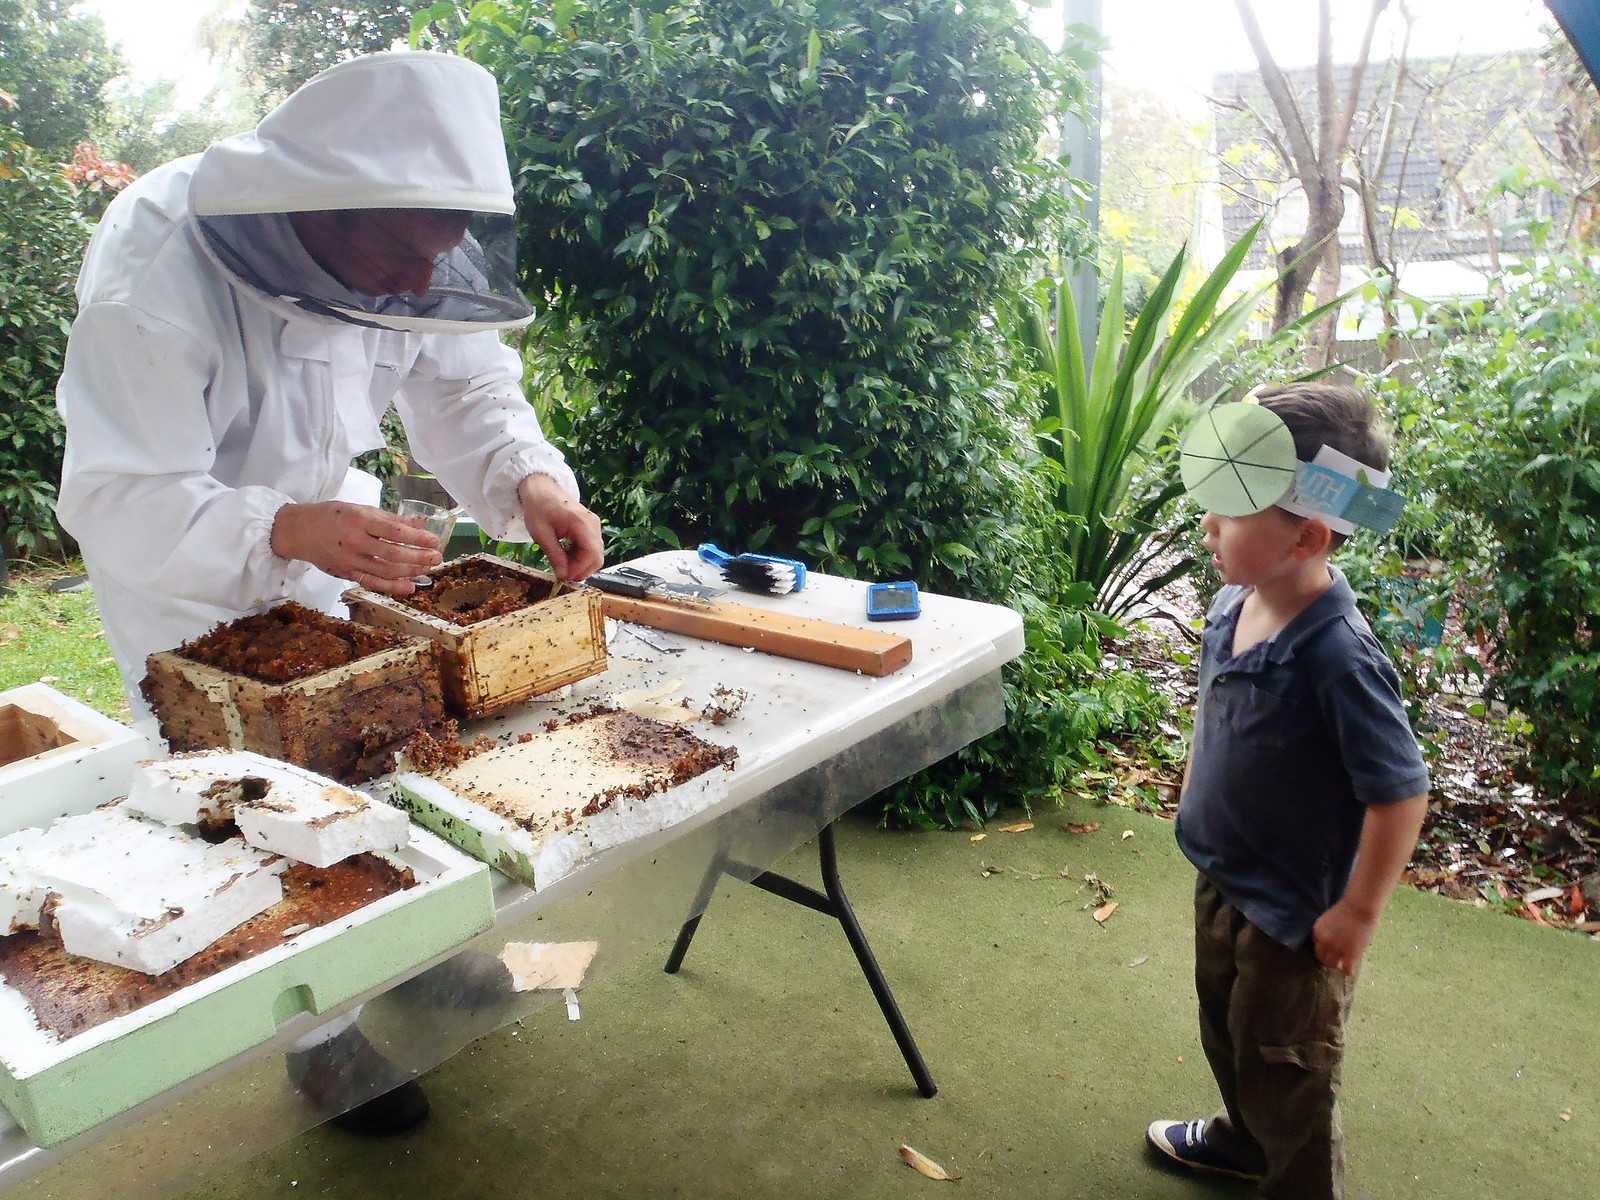 we split our native beehive- these social bees are stingless and they help with pollination